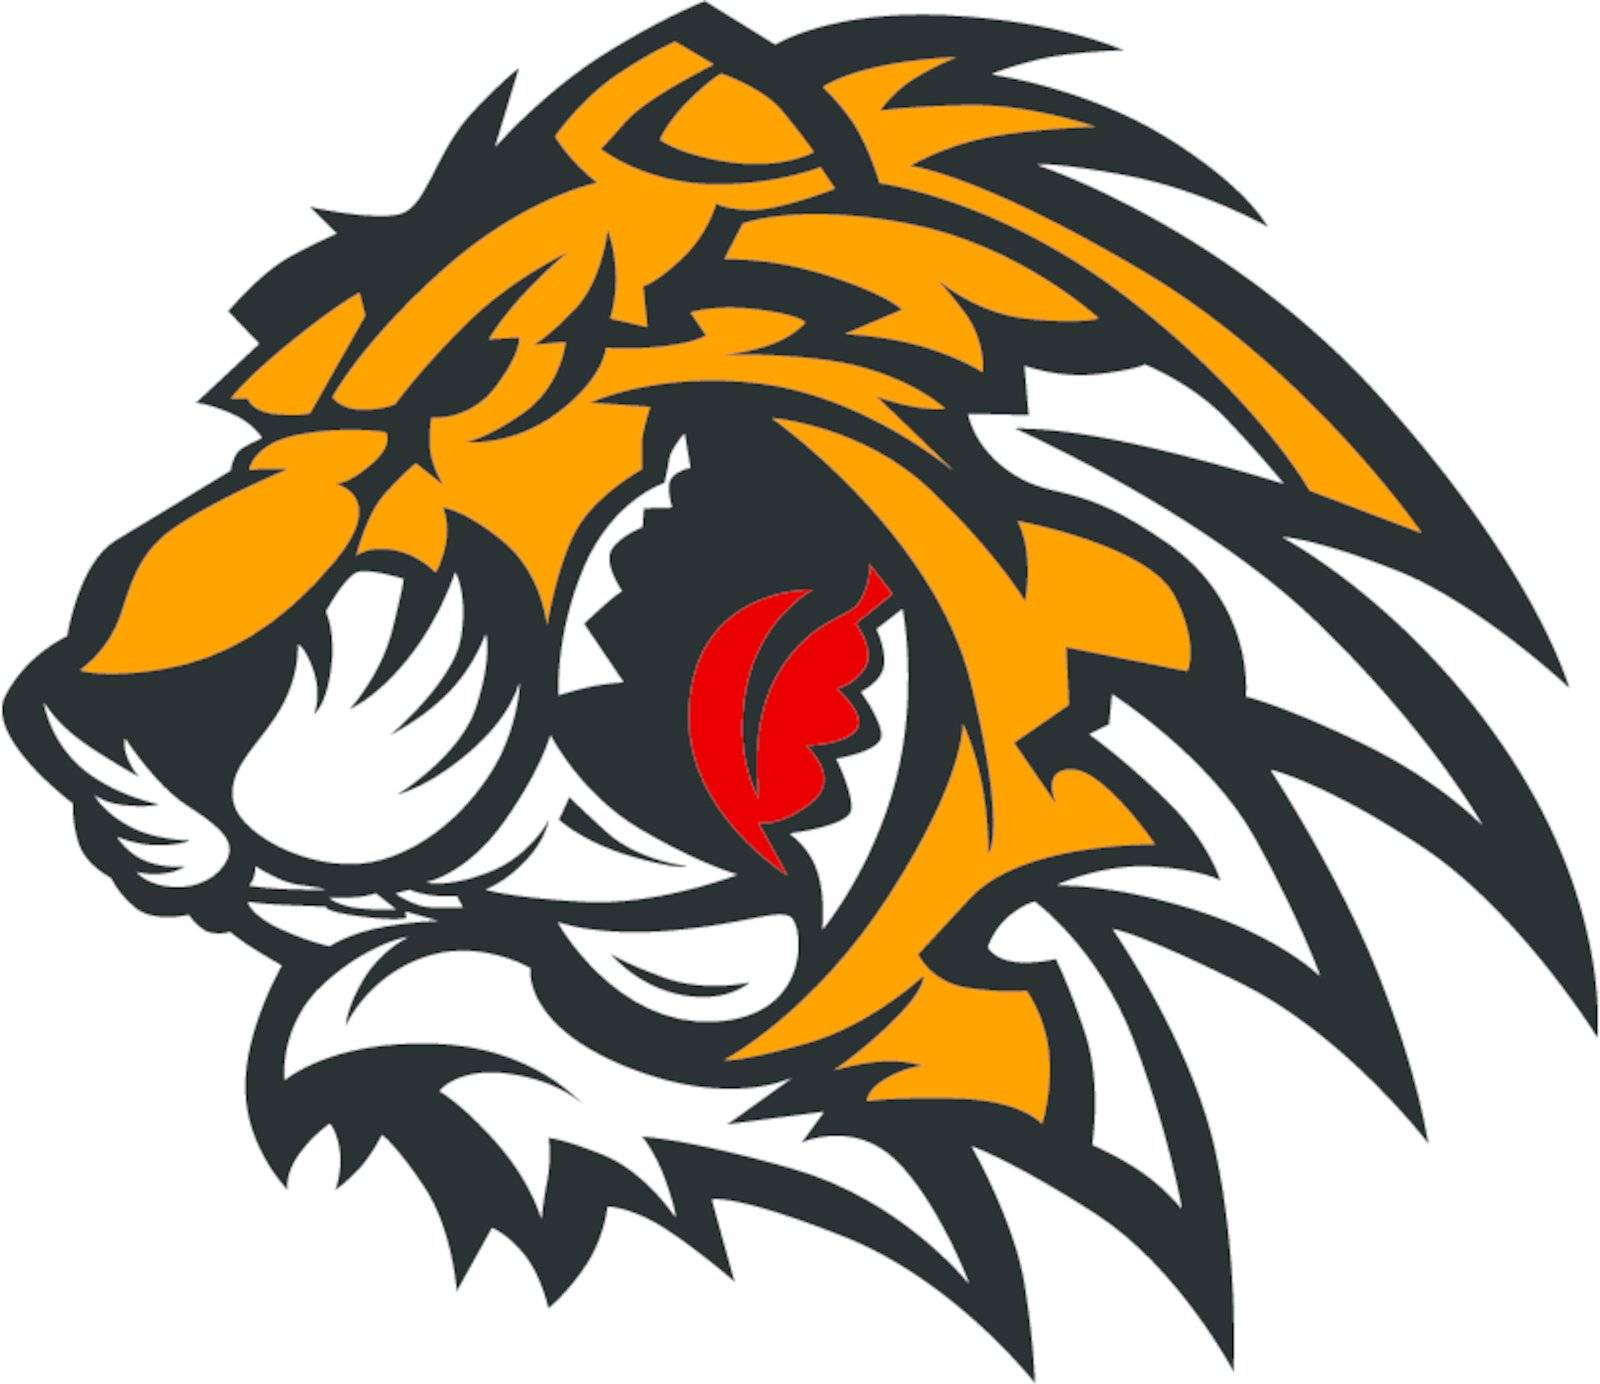 Graphic Team Mascot Image of a Tiger Head